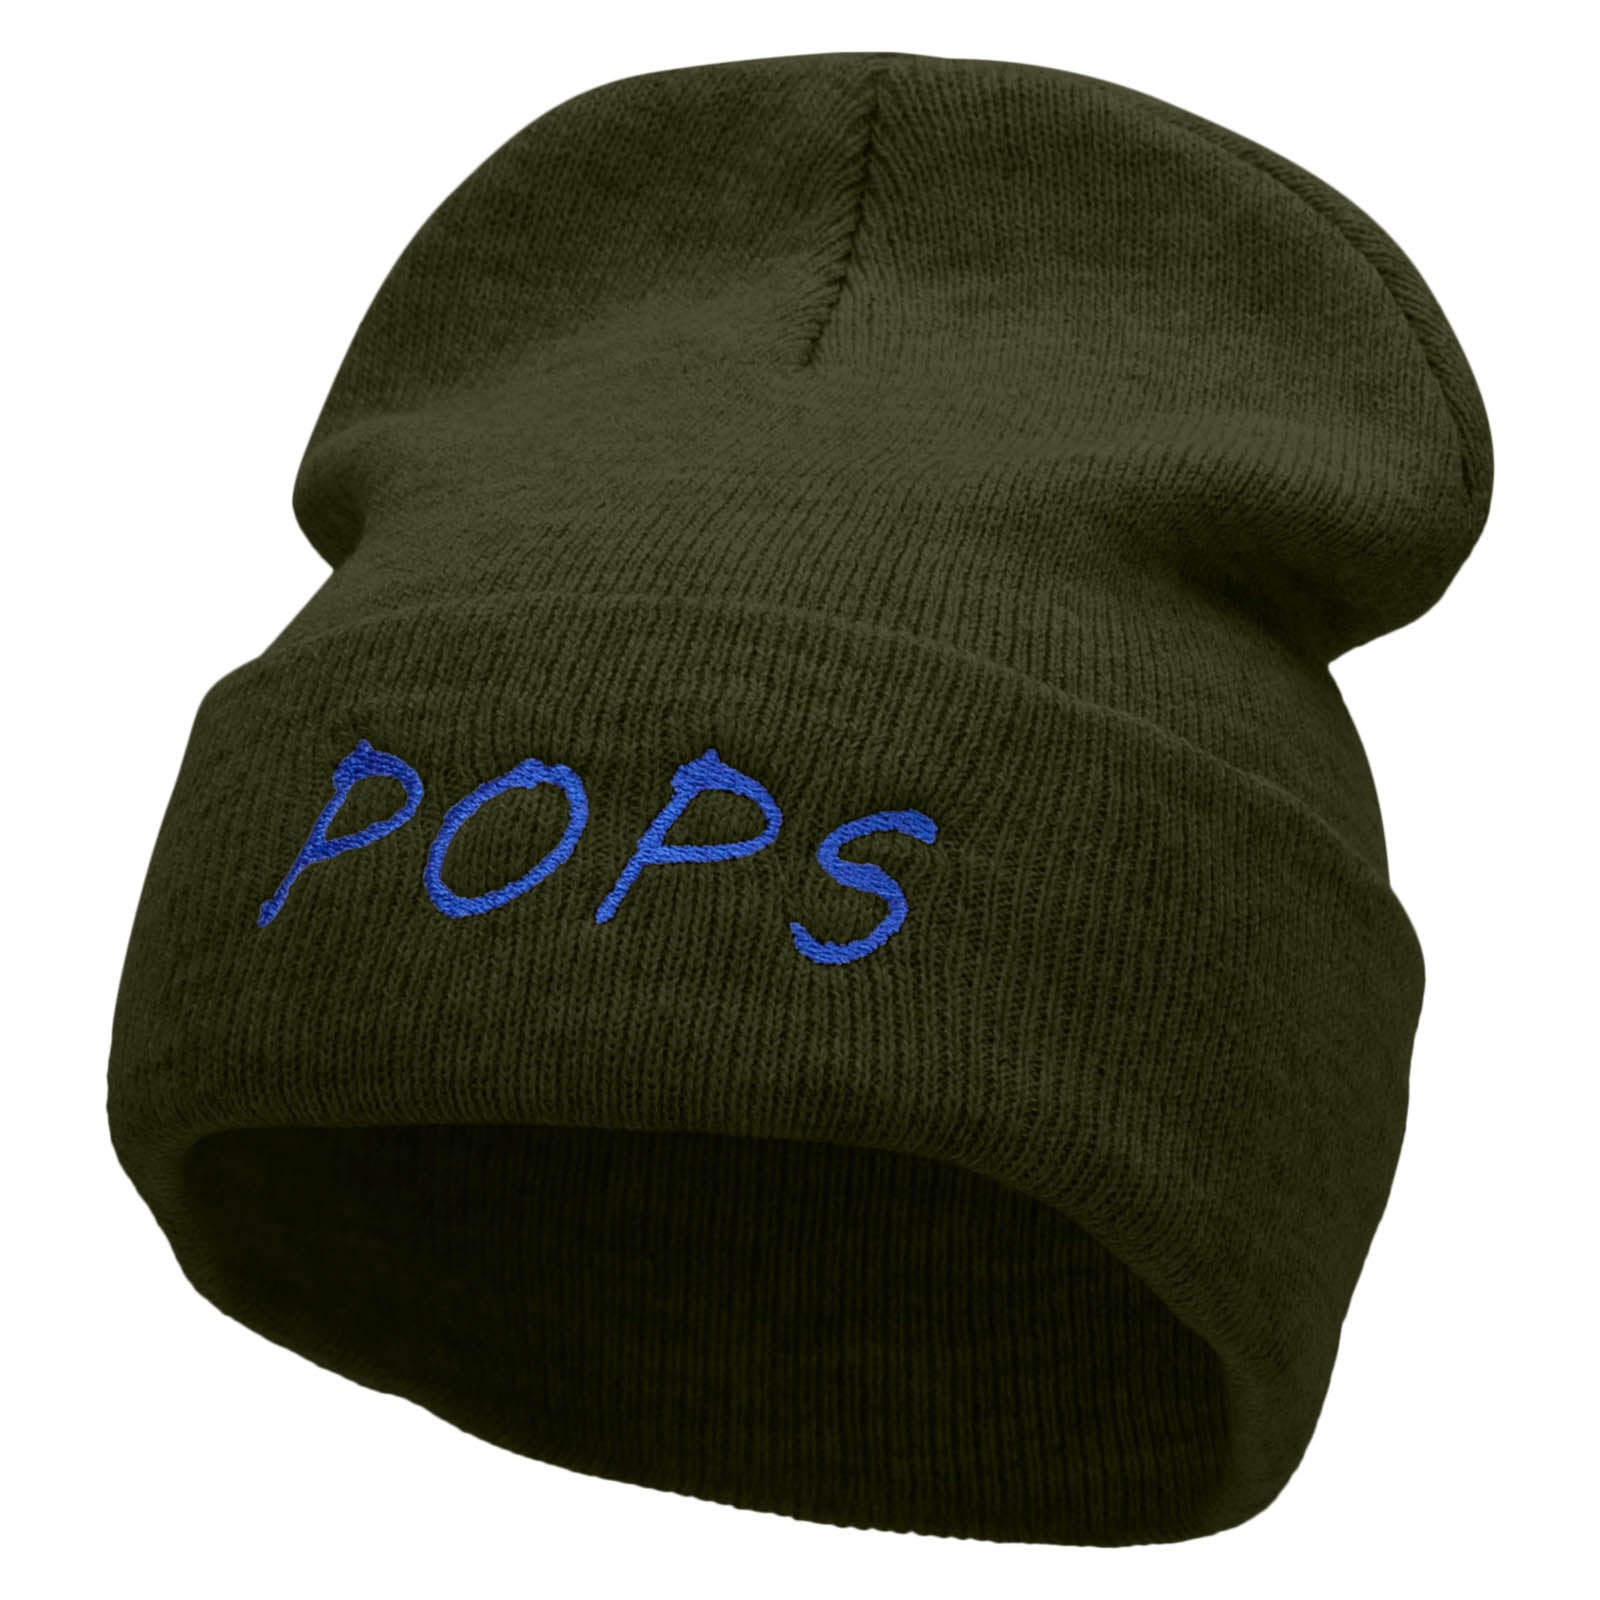 Pops Embroidered 12 Inch Long Knitted Beanie - Olive OSFM